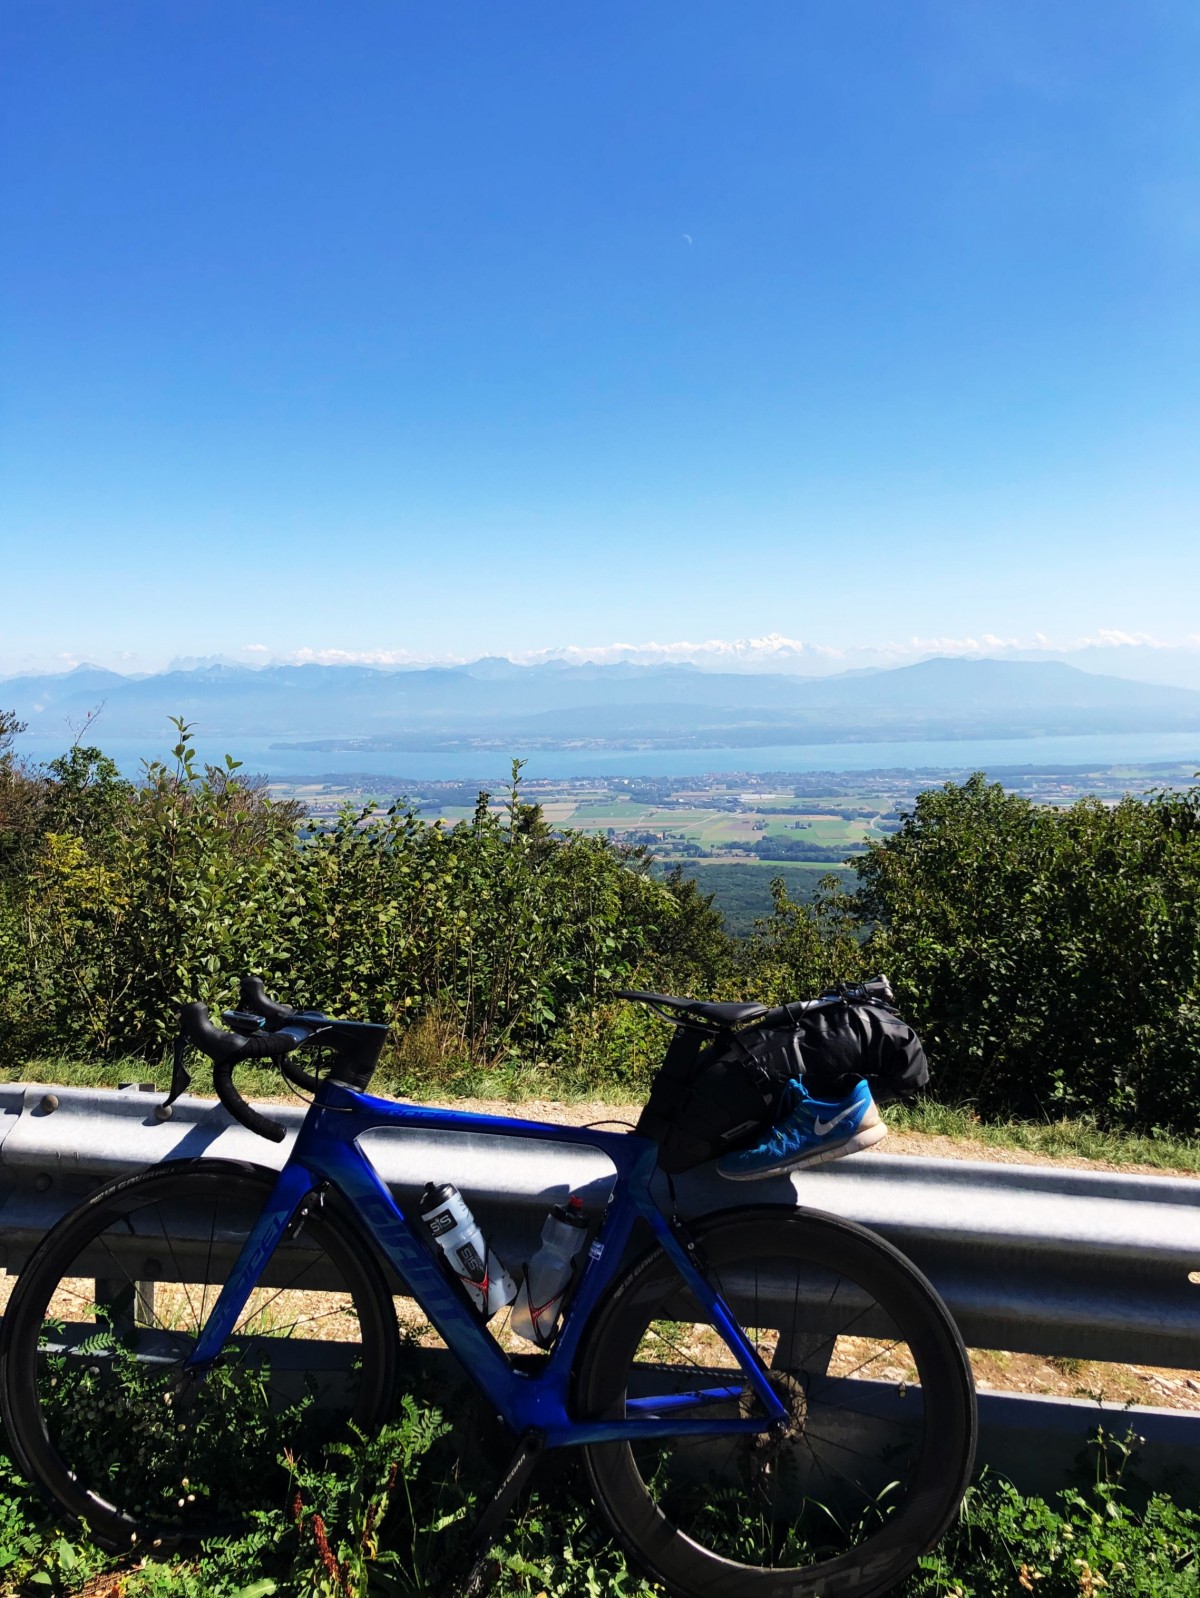 "my bike in front of Lake Geneva with the Alps in the backdrop - I was descending Saint Cergue at this moment. " - Olly